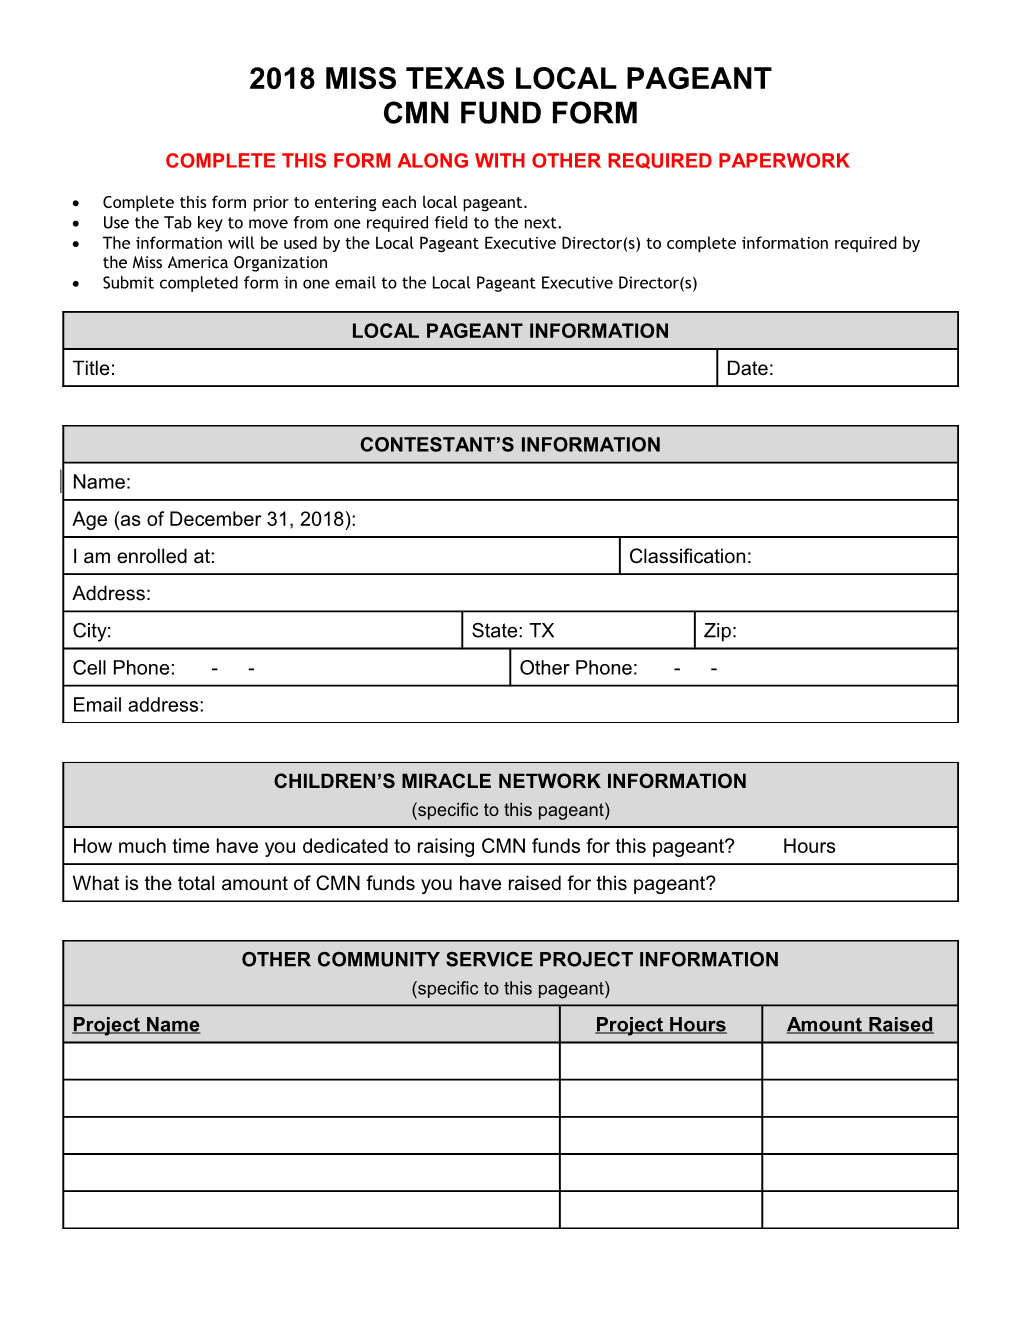 Complete This Form Along with Other Required Paperwork